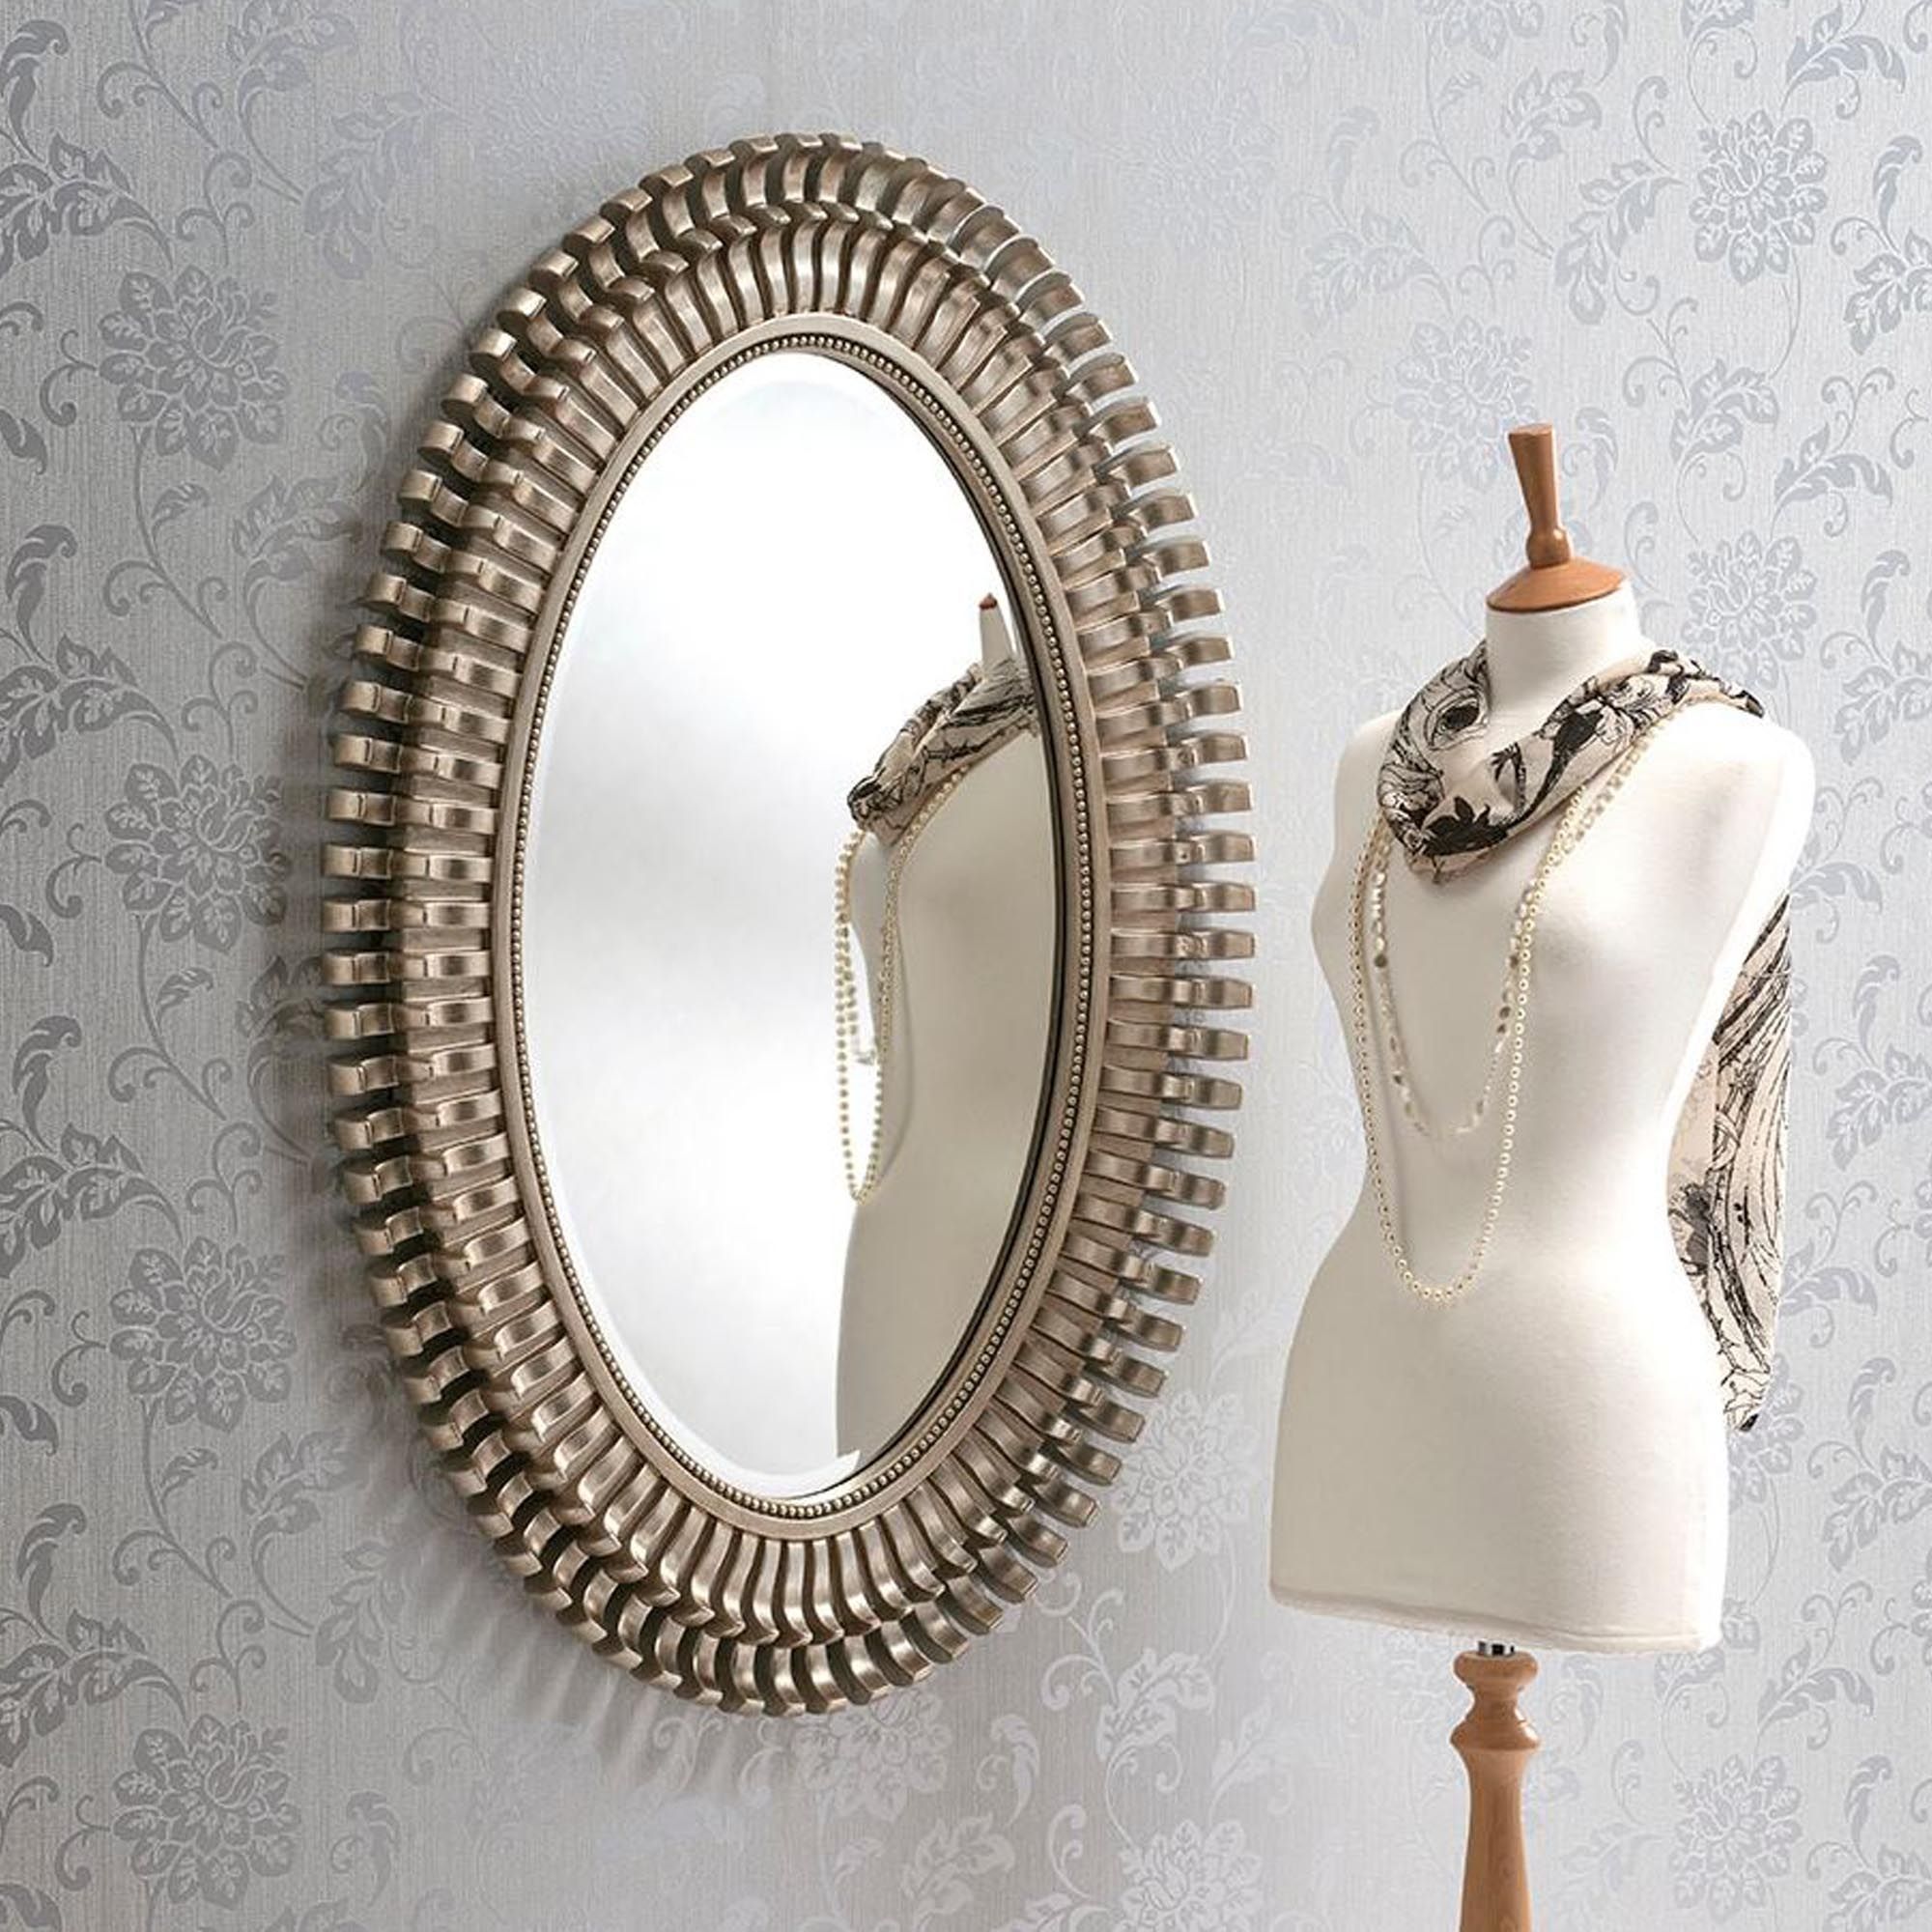 Oval Contemporary Antique Silver Wall Mirror | Homesdirect365 Inside Antiqued Glass Wall Mirrors (View 9 of 15)